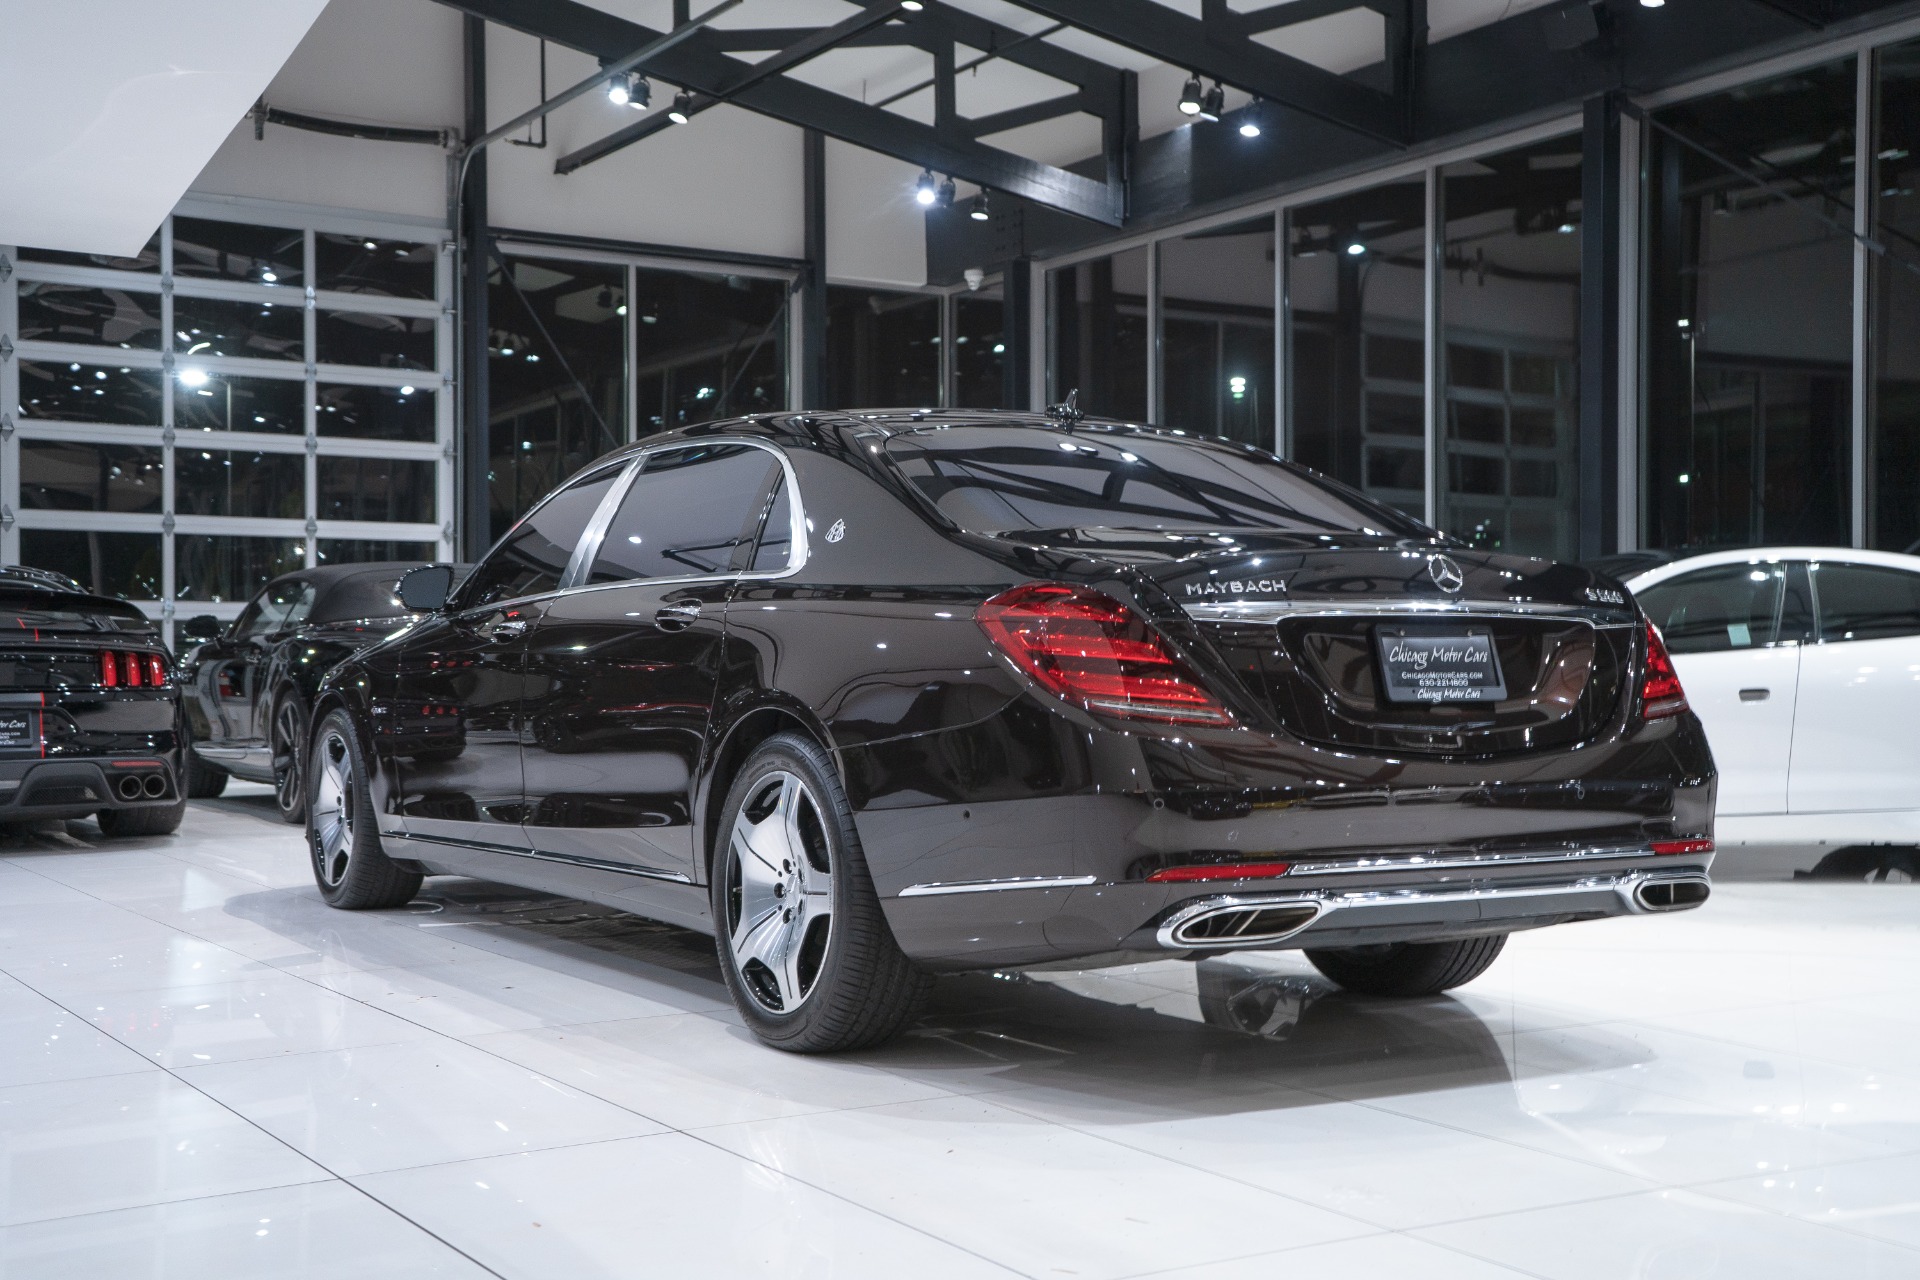 Used-2019-Mercedes-Benz-S560-Maybach-4Matic-Sedan---MSRP-194045--Spectacular-Two-Tone-Magic-Sky-Exec-Rear-Seats